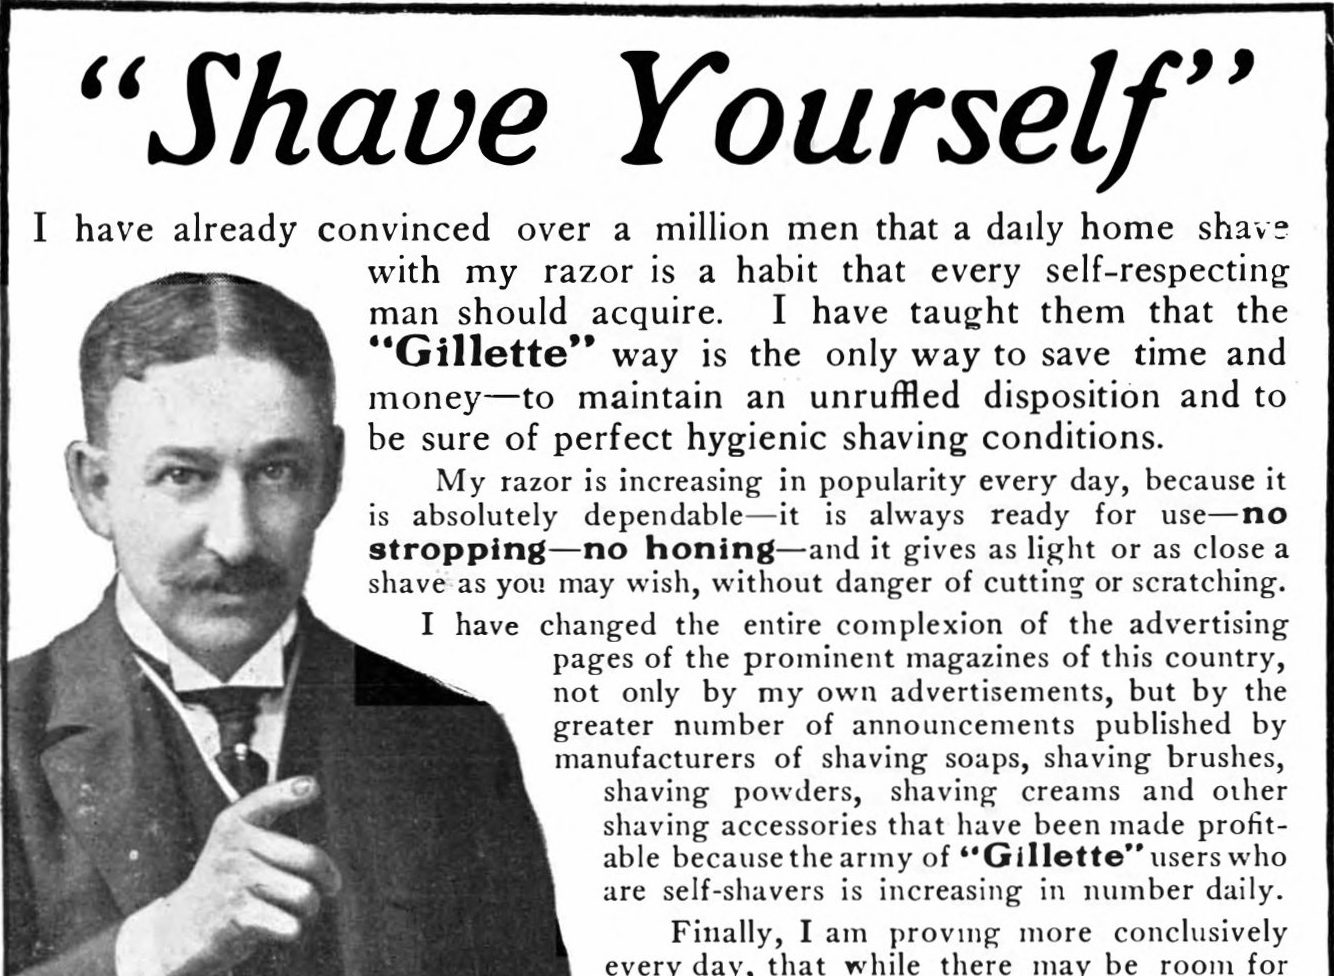 An ad reading "Shave Yourself!" and a picture of a man pointing